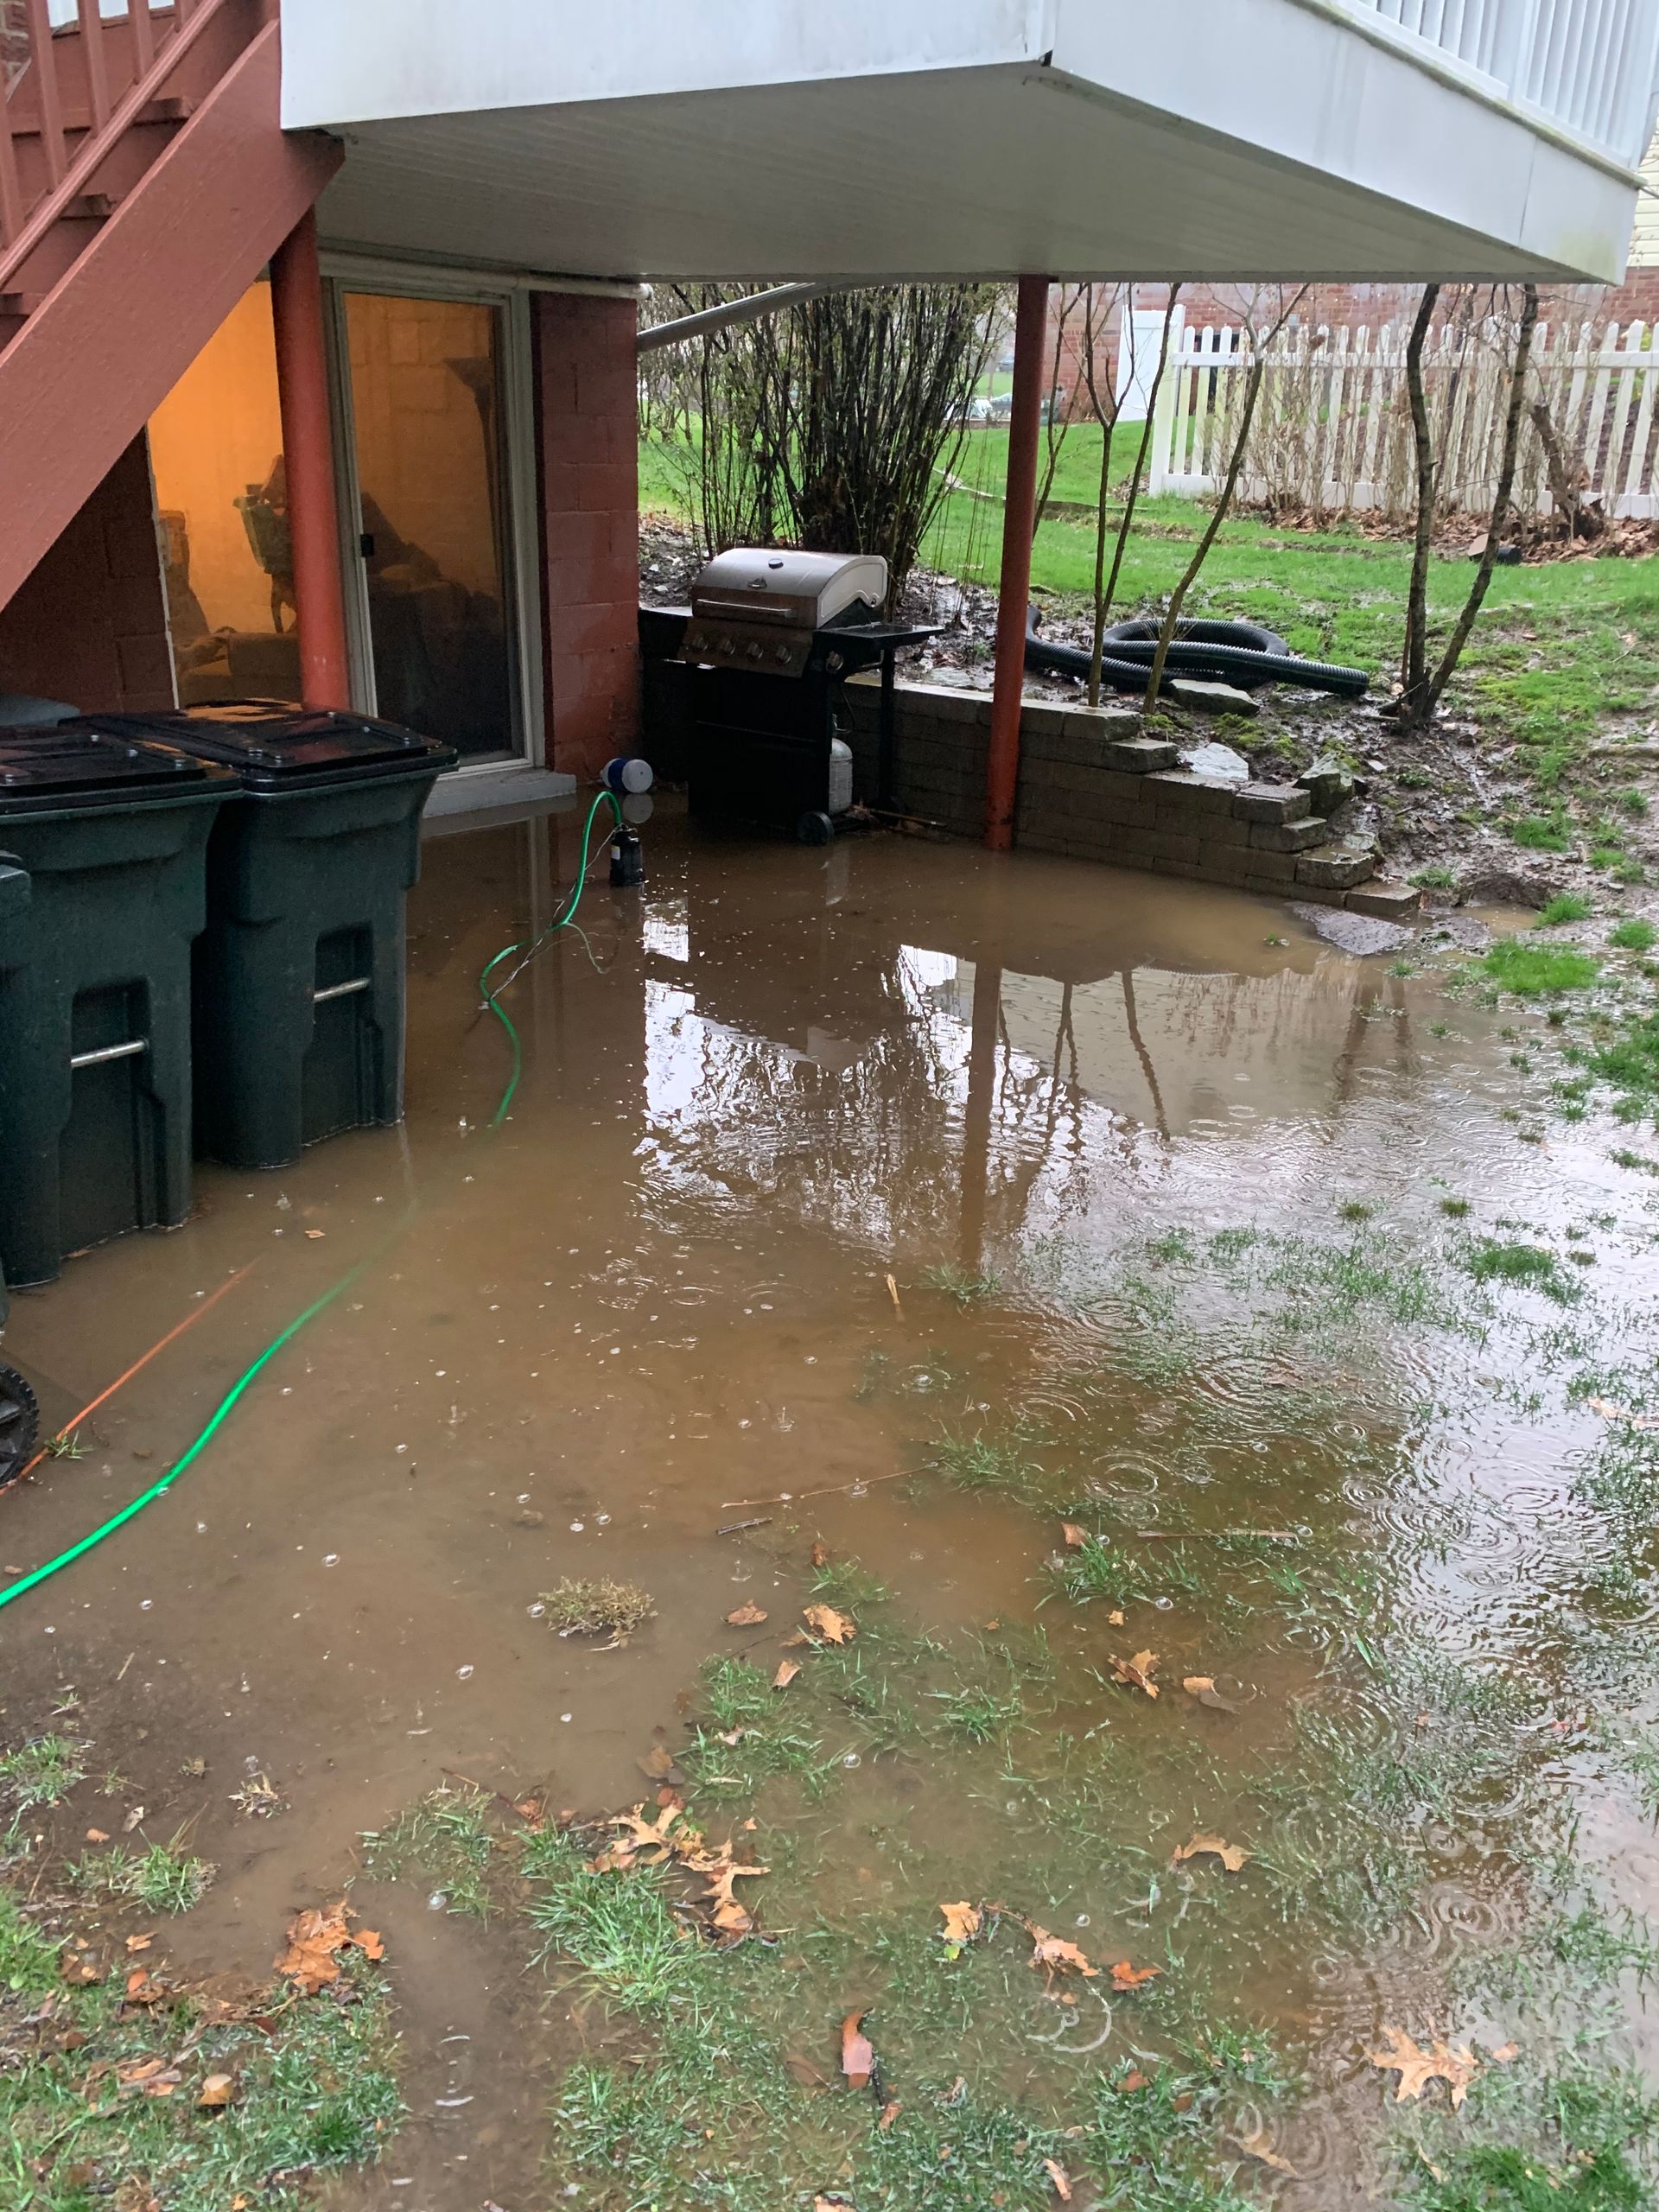 A flooded backyard with trash cans and a hose.